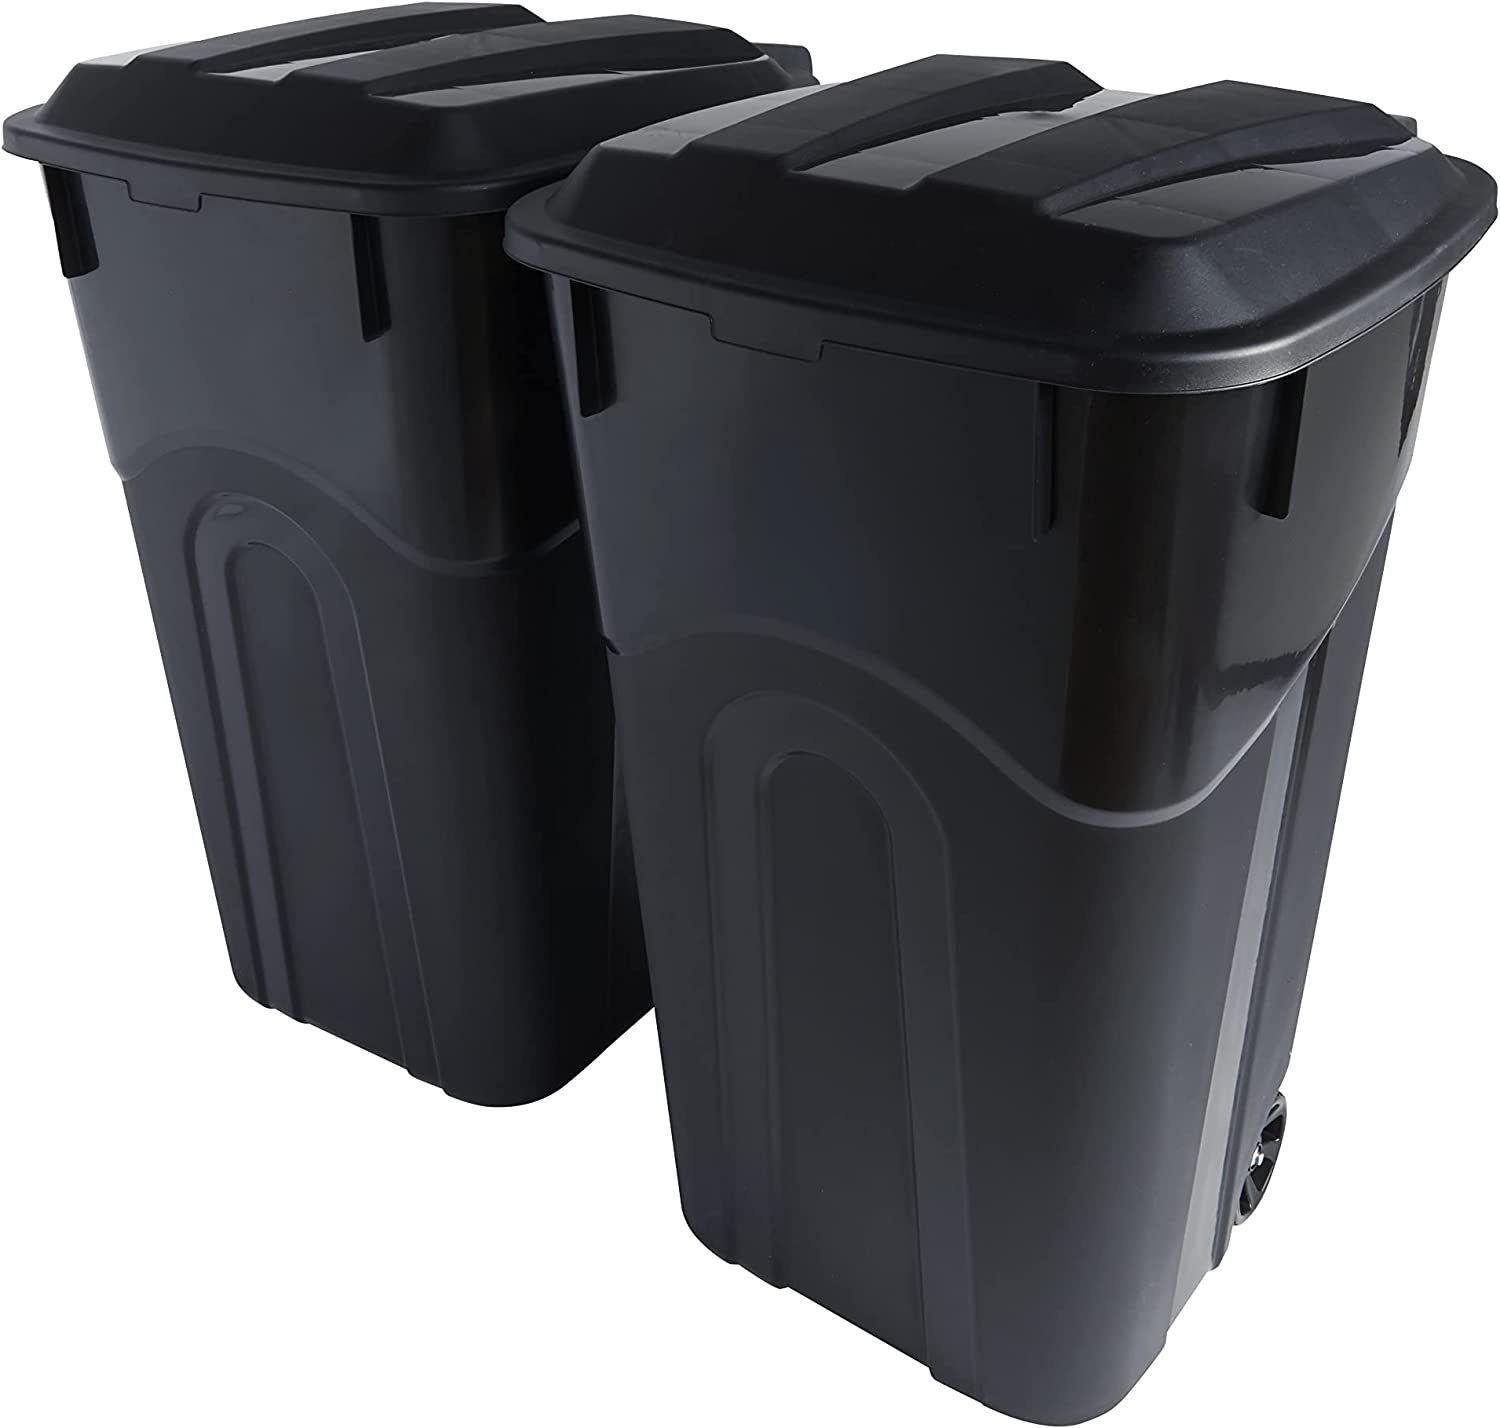 United Solutions Plastic Outdoor Trash Can, 32-Gallon